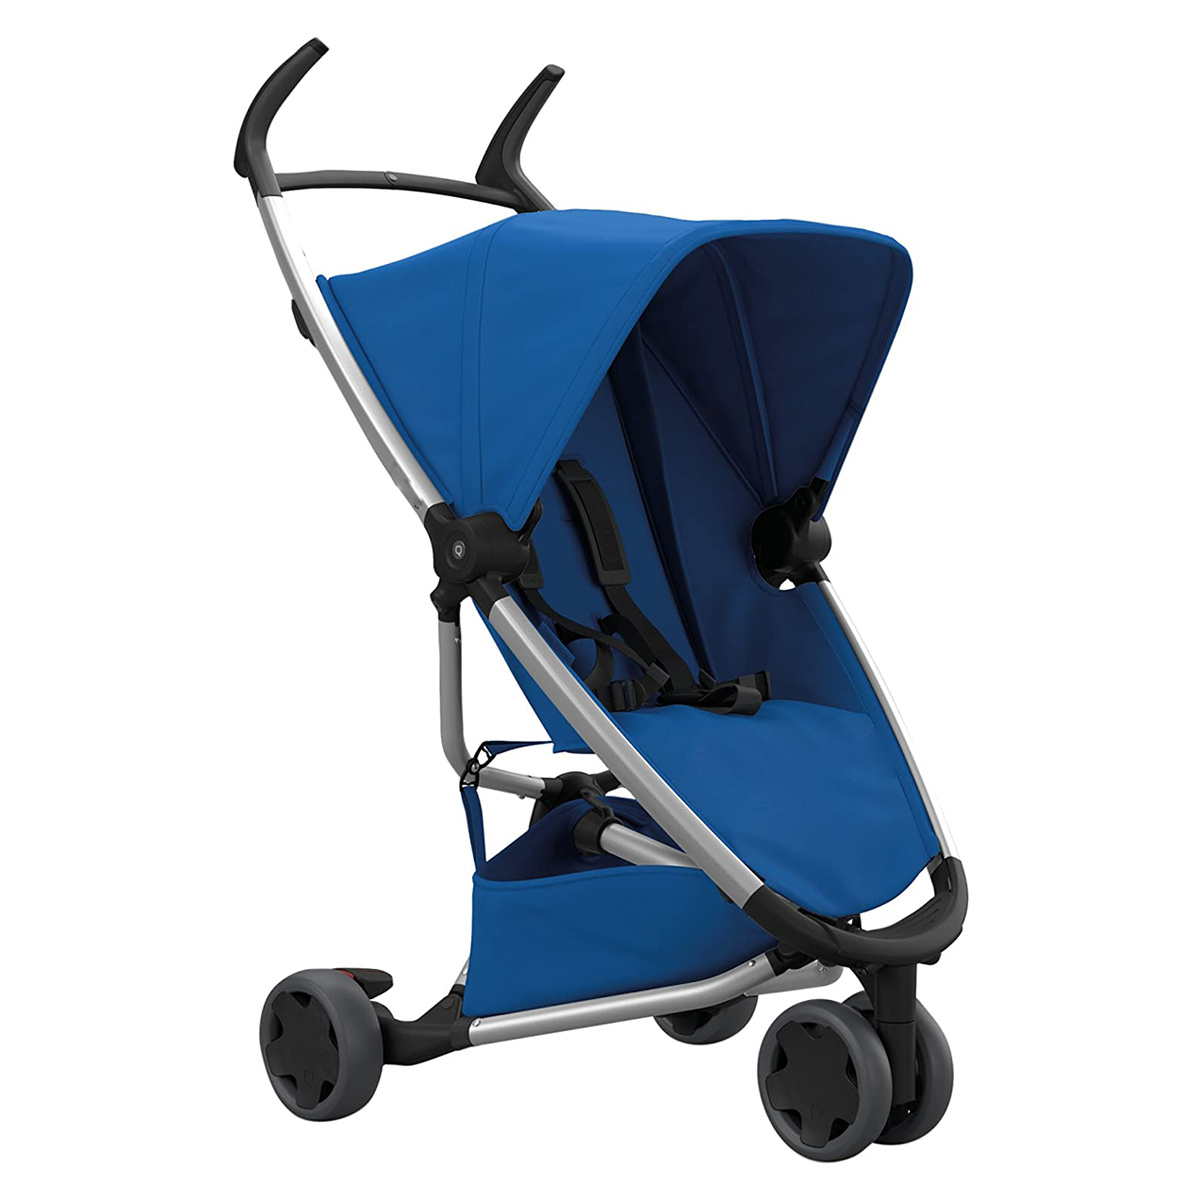 High Quality Baby Stroller Can Be Used For Sitting, Lying, Children's Trolley, Umbrella Cart, 0-4 Years Old